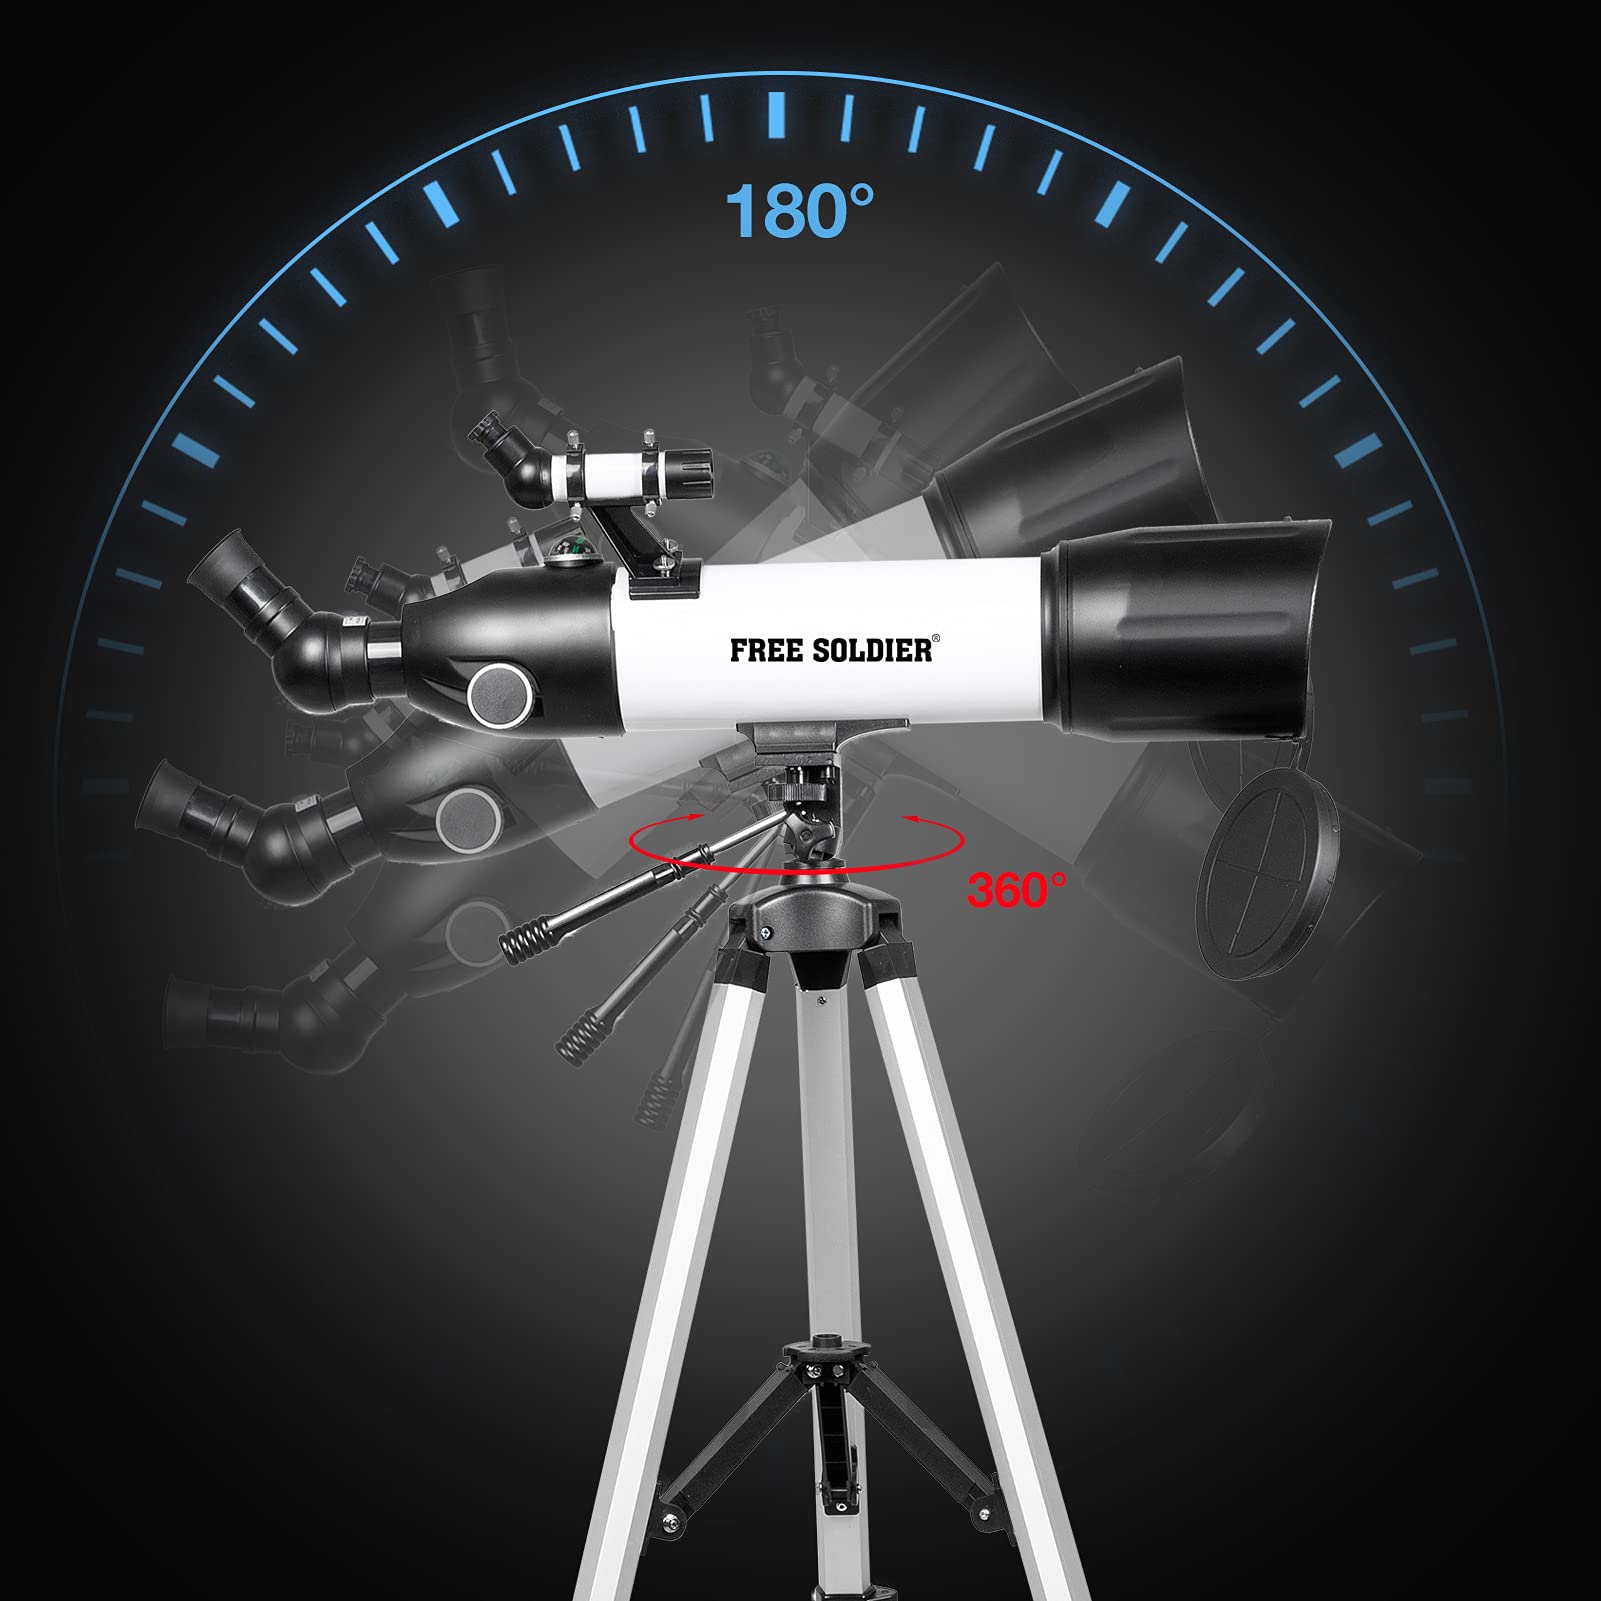 24X-200X High Power Astronomical Telescope for All Ages